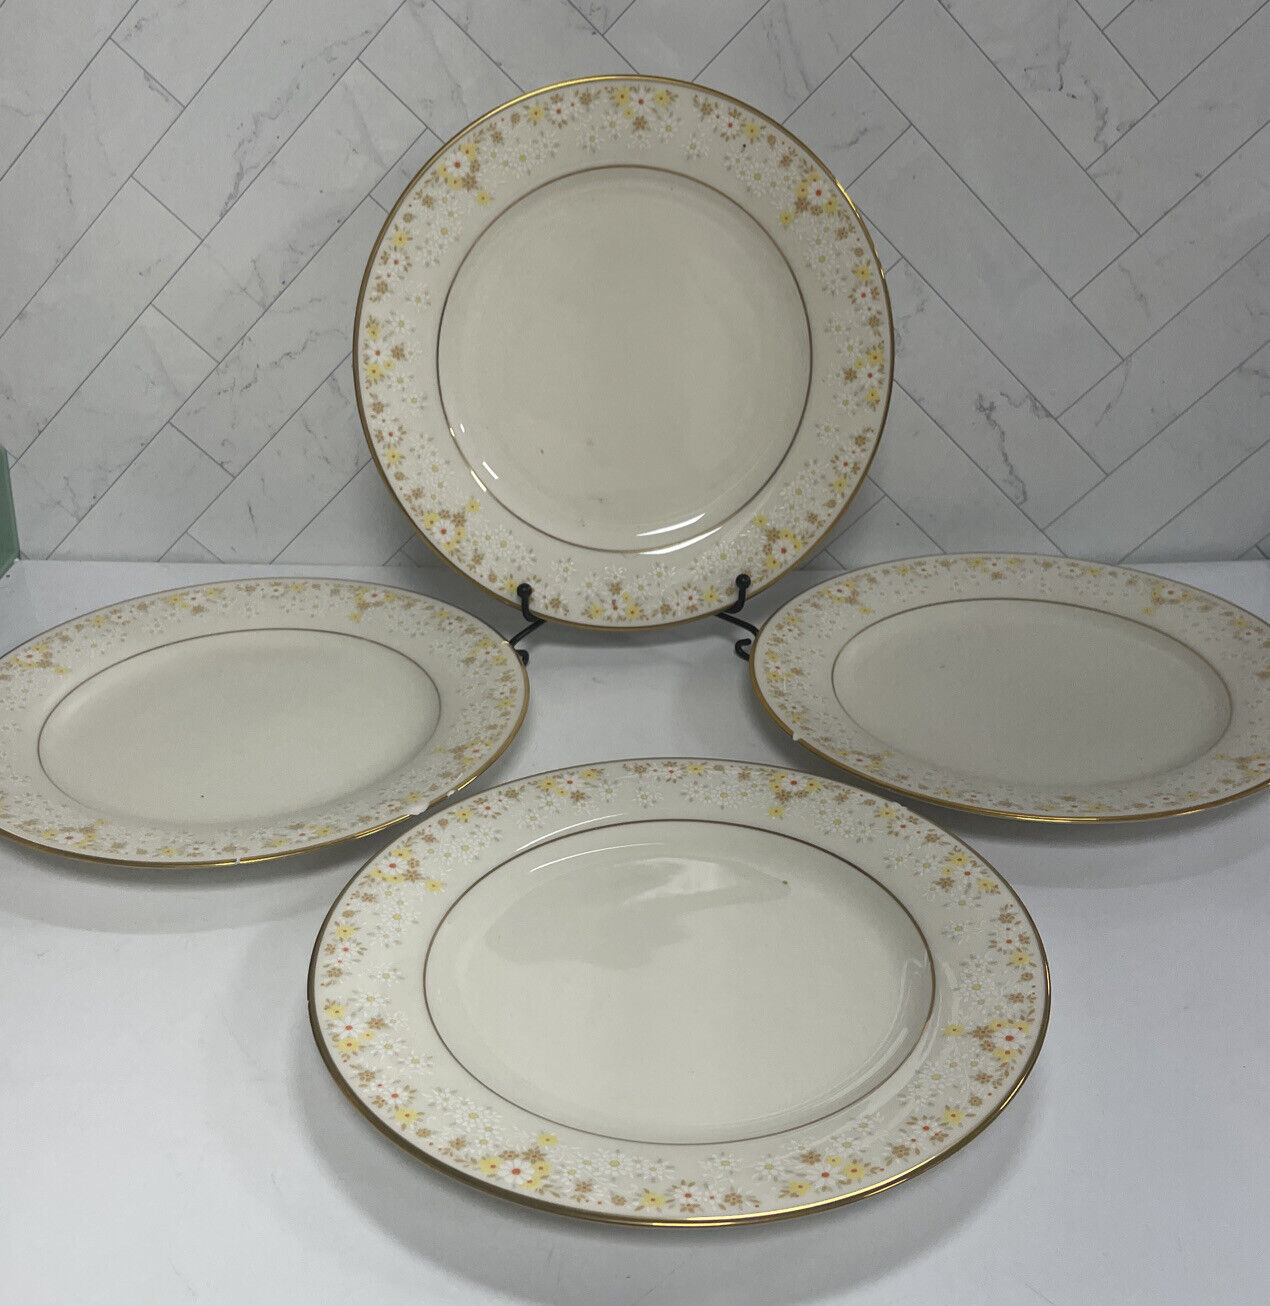 Set of 4 Noritake Ivory China Fragrance PATTERN Salad/Lunch Plates MADE IN JAPAN